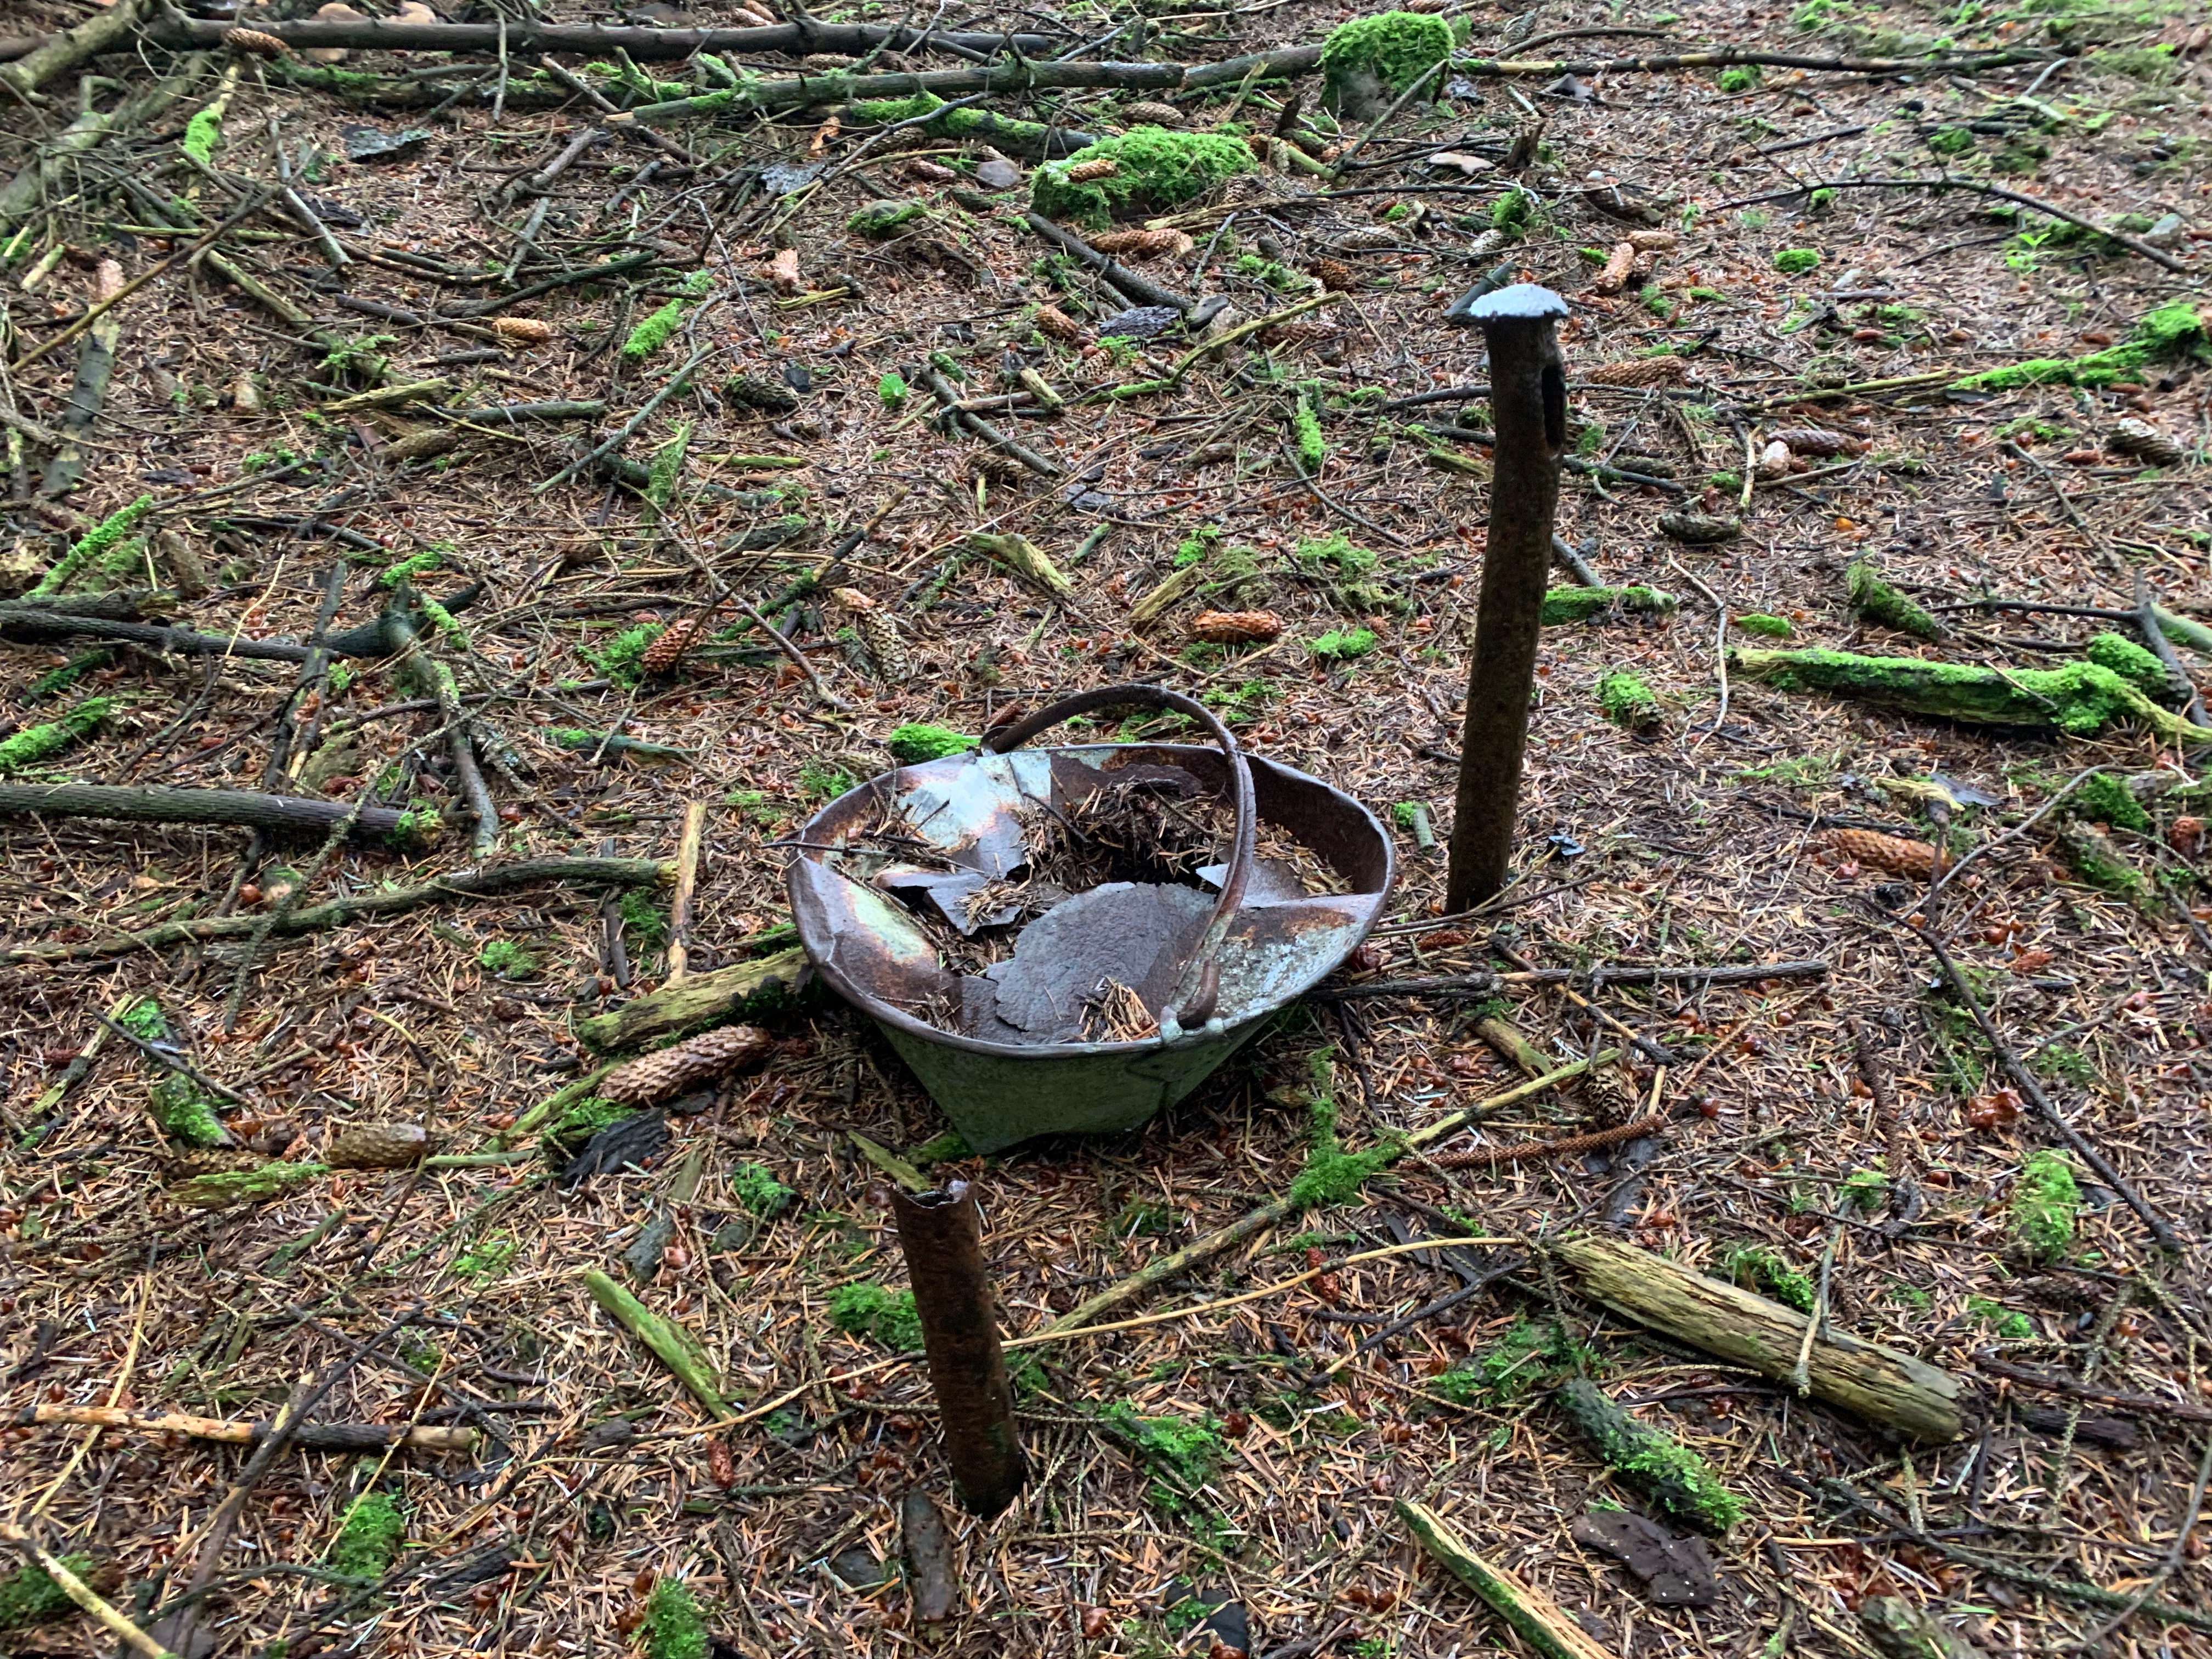 remains of a tin pail lid and handle next to some iron sticking out the ground of a forest floor